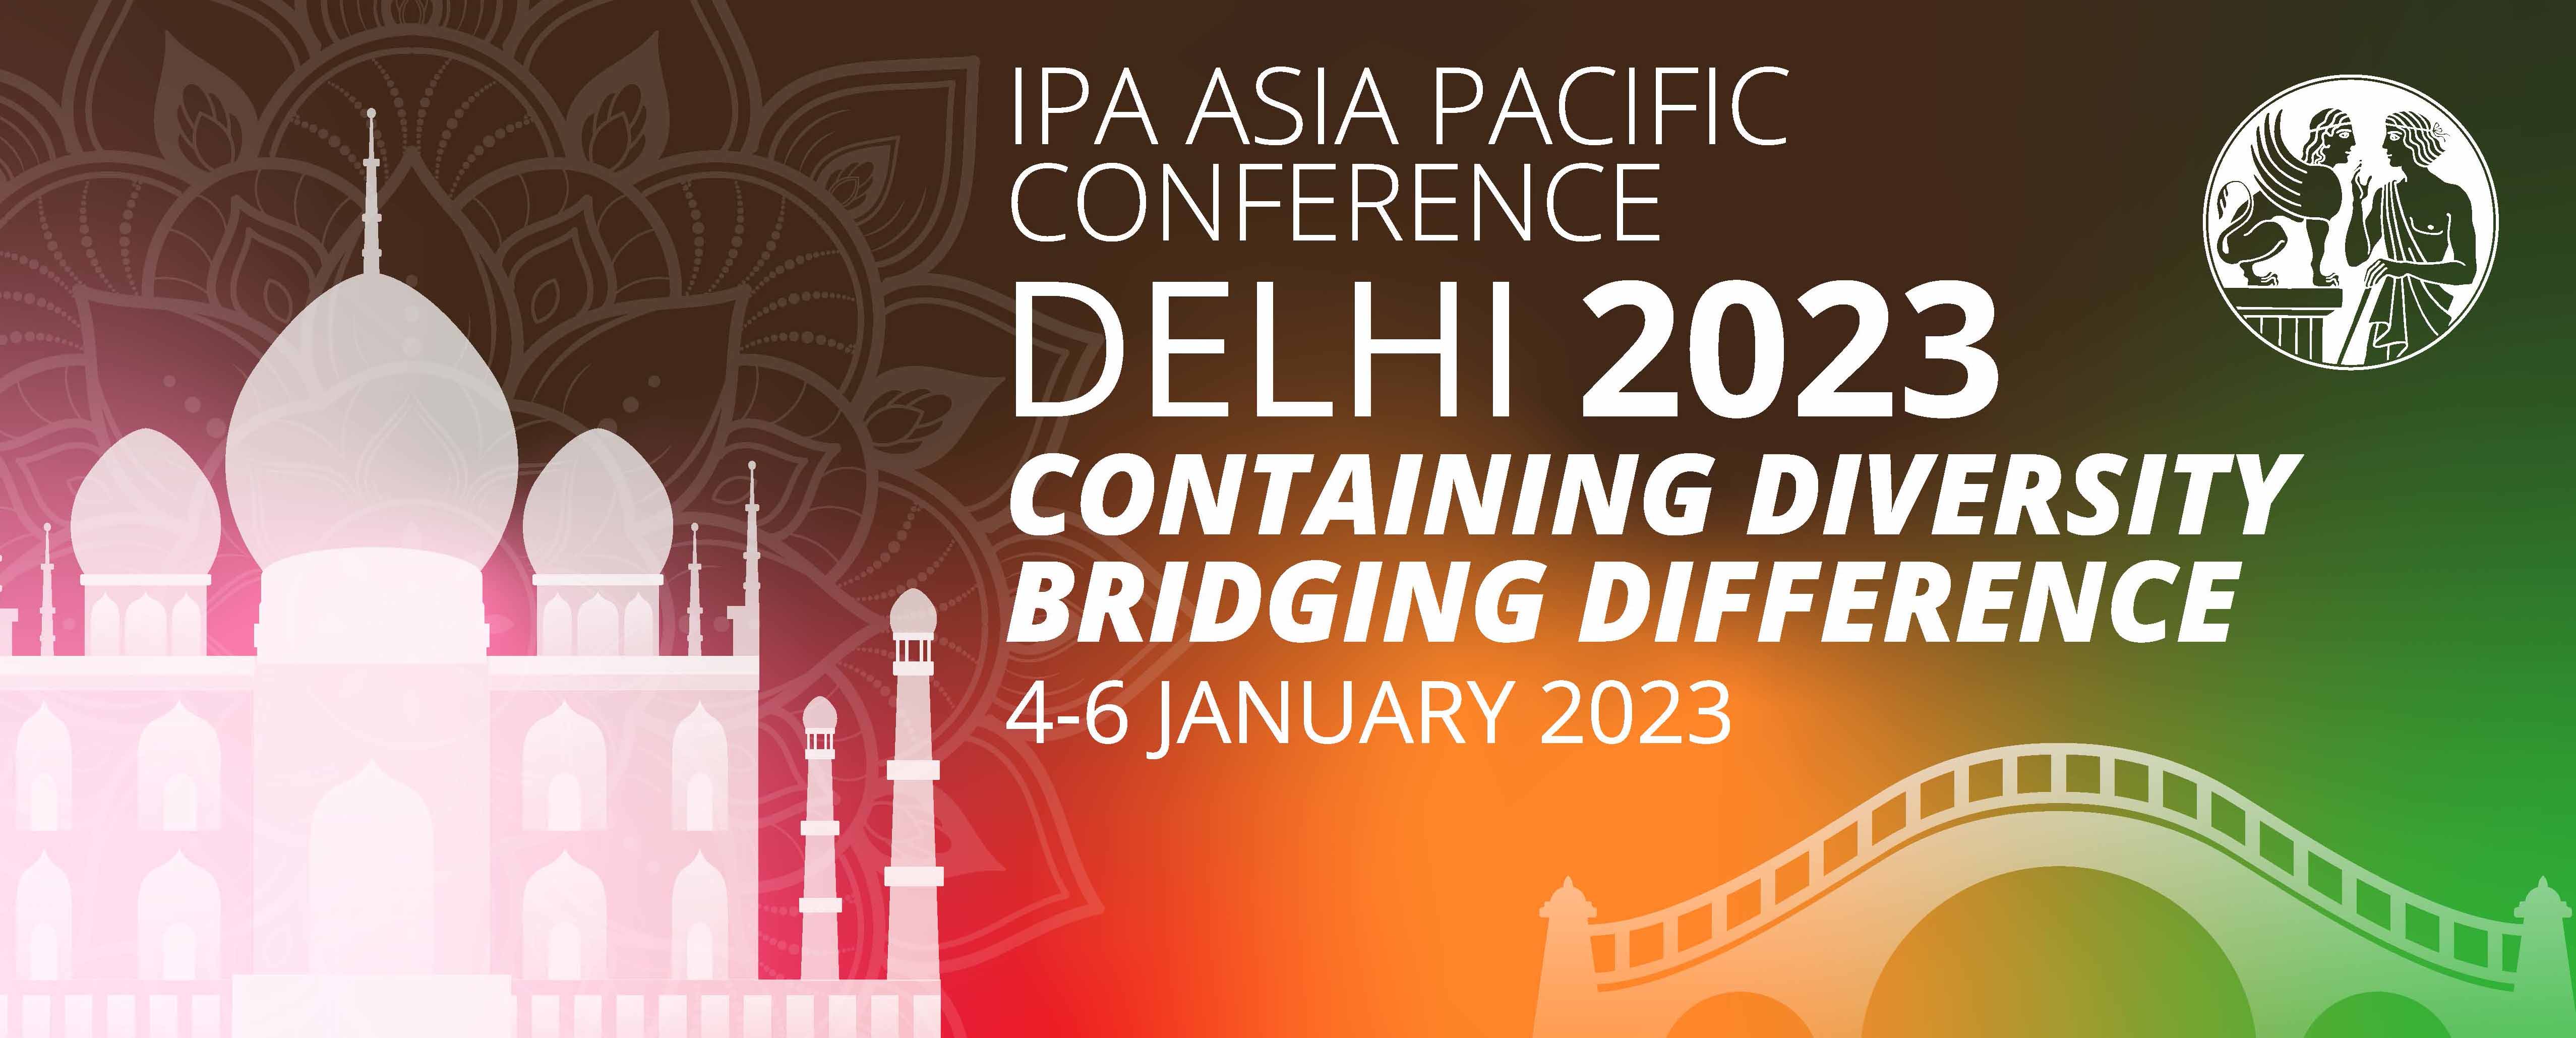 Asia-Pacific Conference 2023 - Call for Proposals